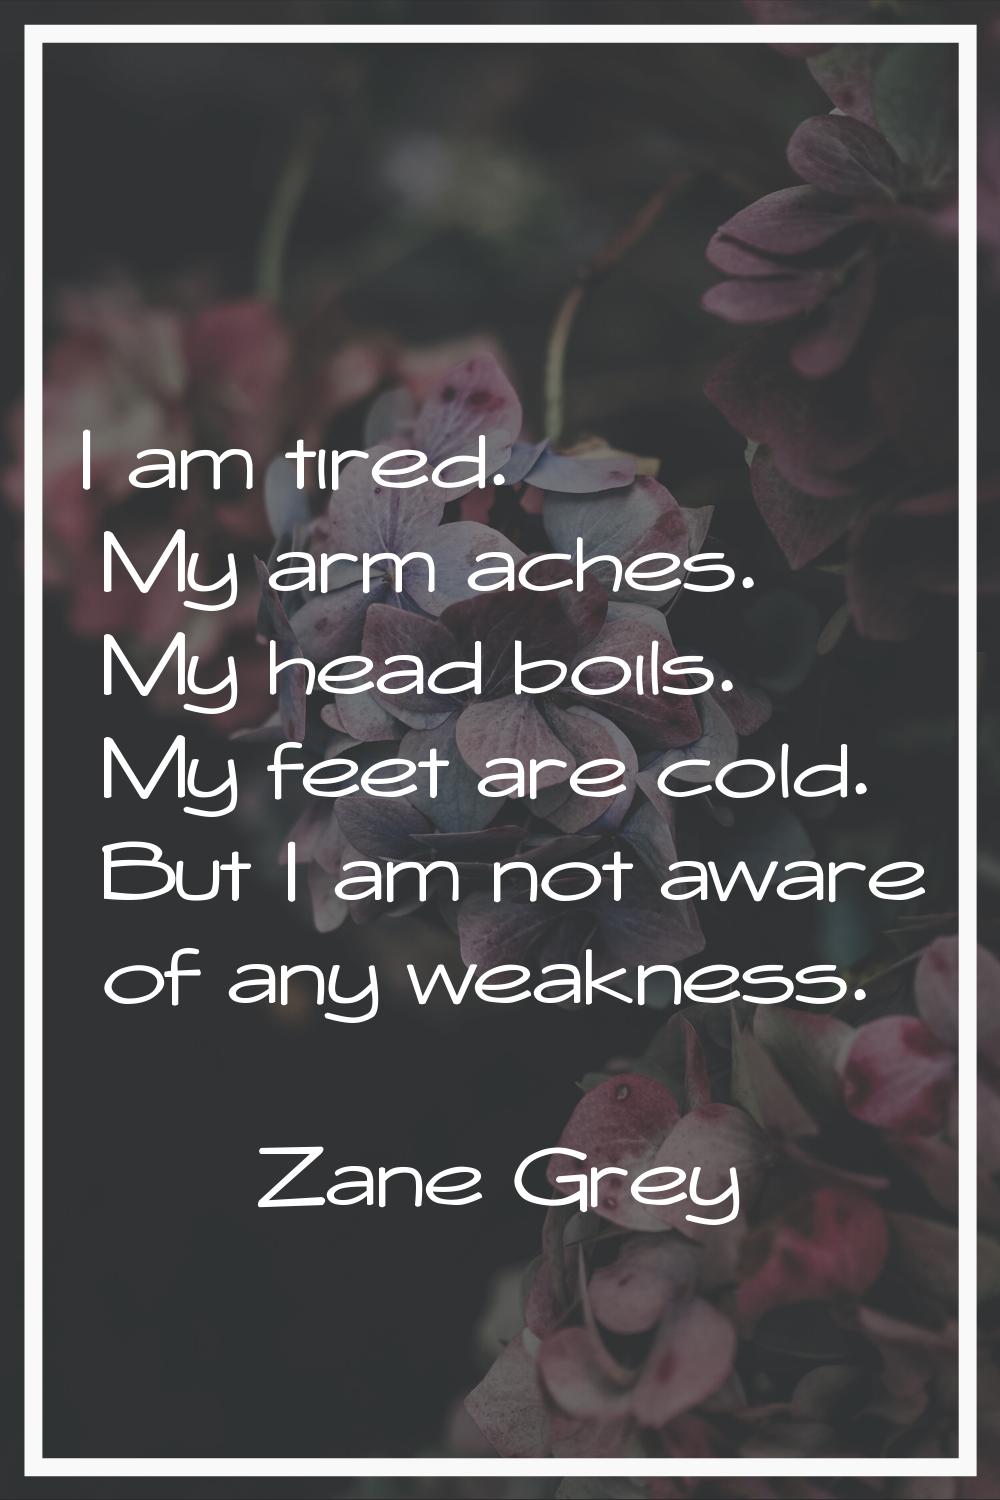 I am tired. My arm aches. My head boils. My feet are cold. But I am not aware of any weakness.